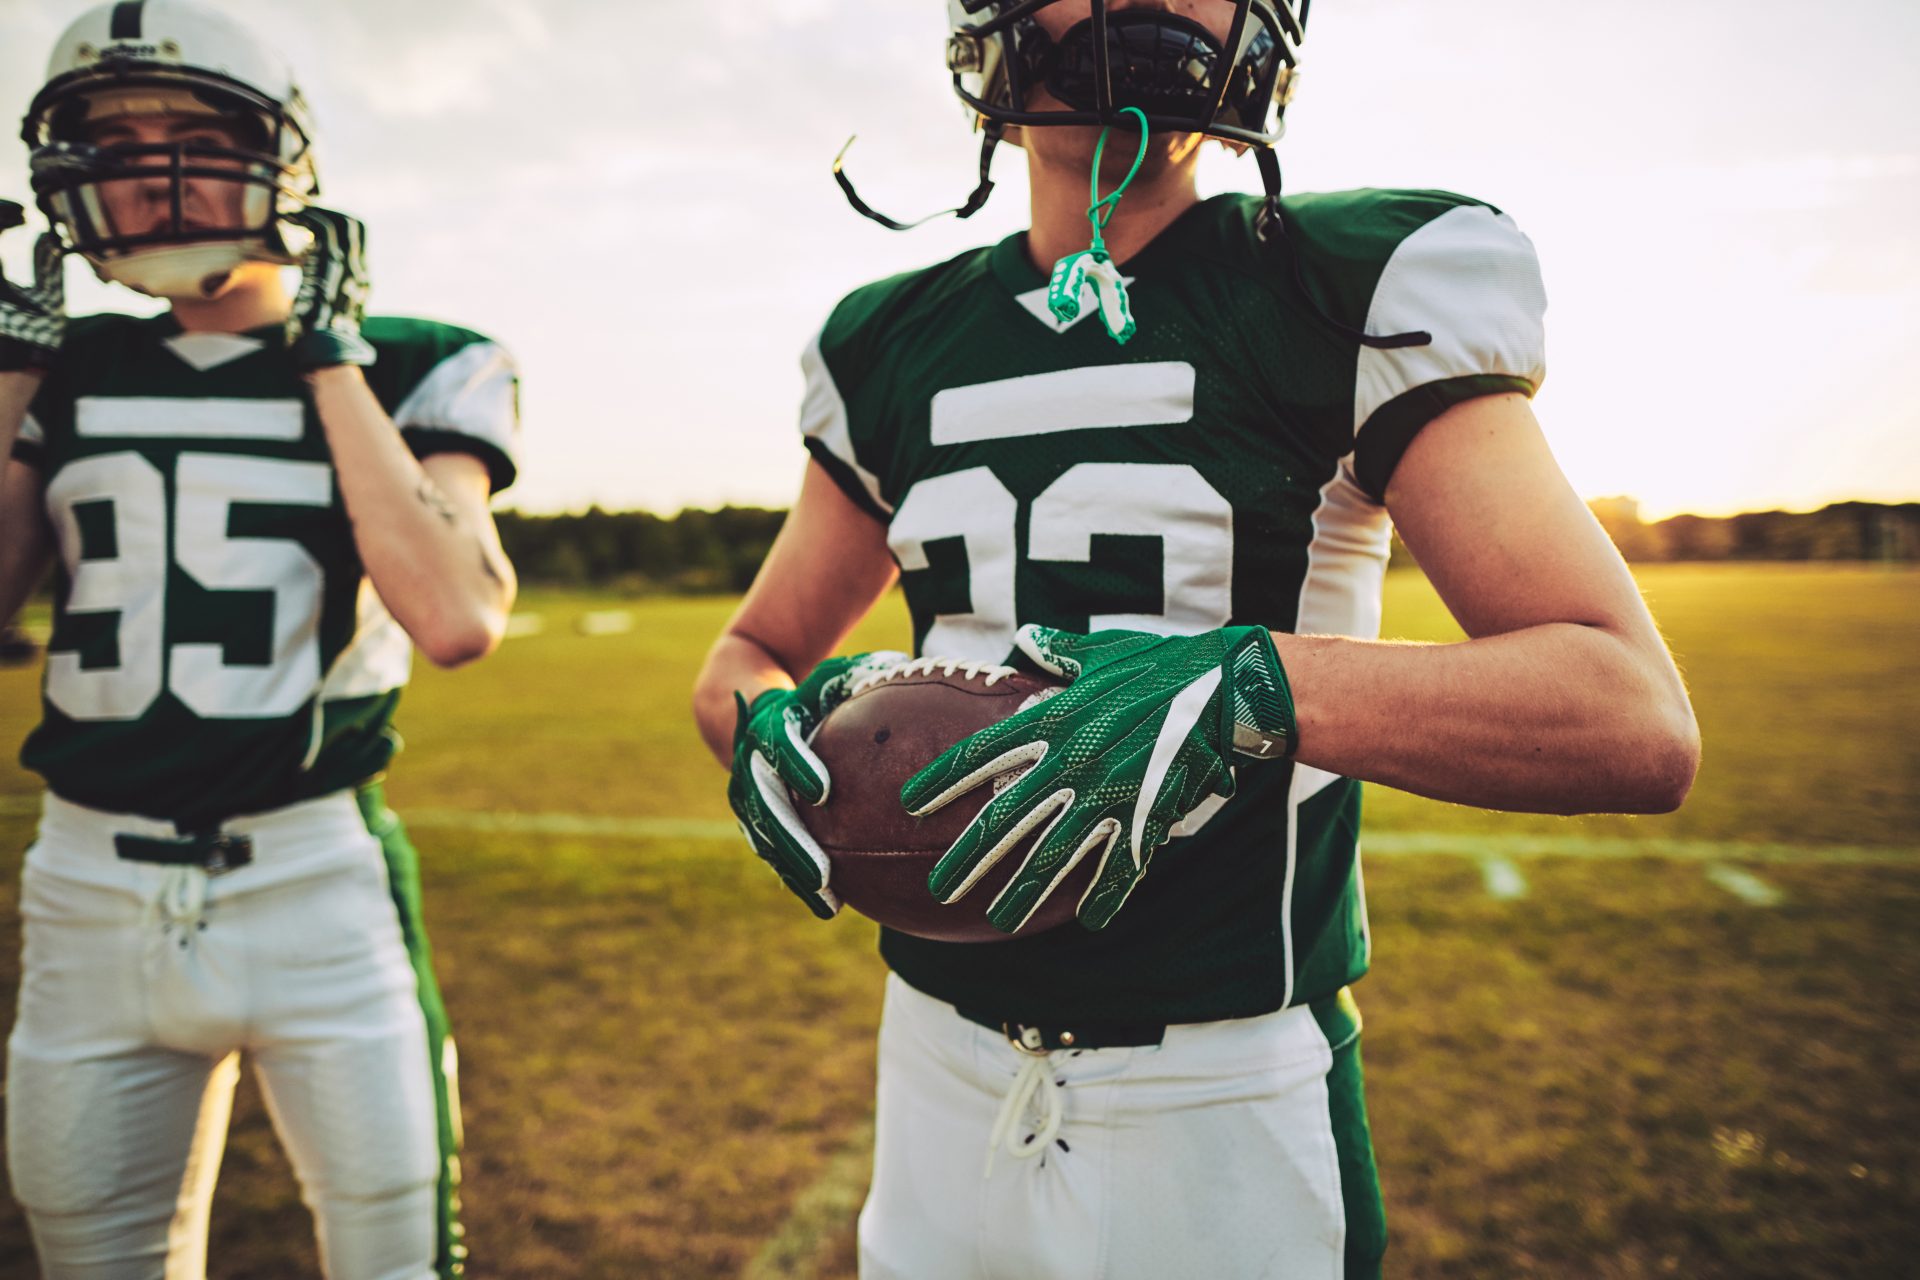 Tips for helping your child excel at American football